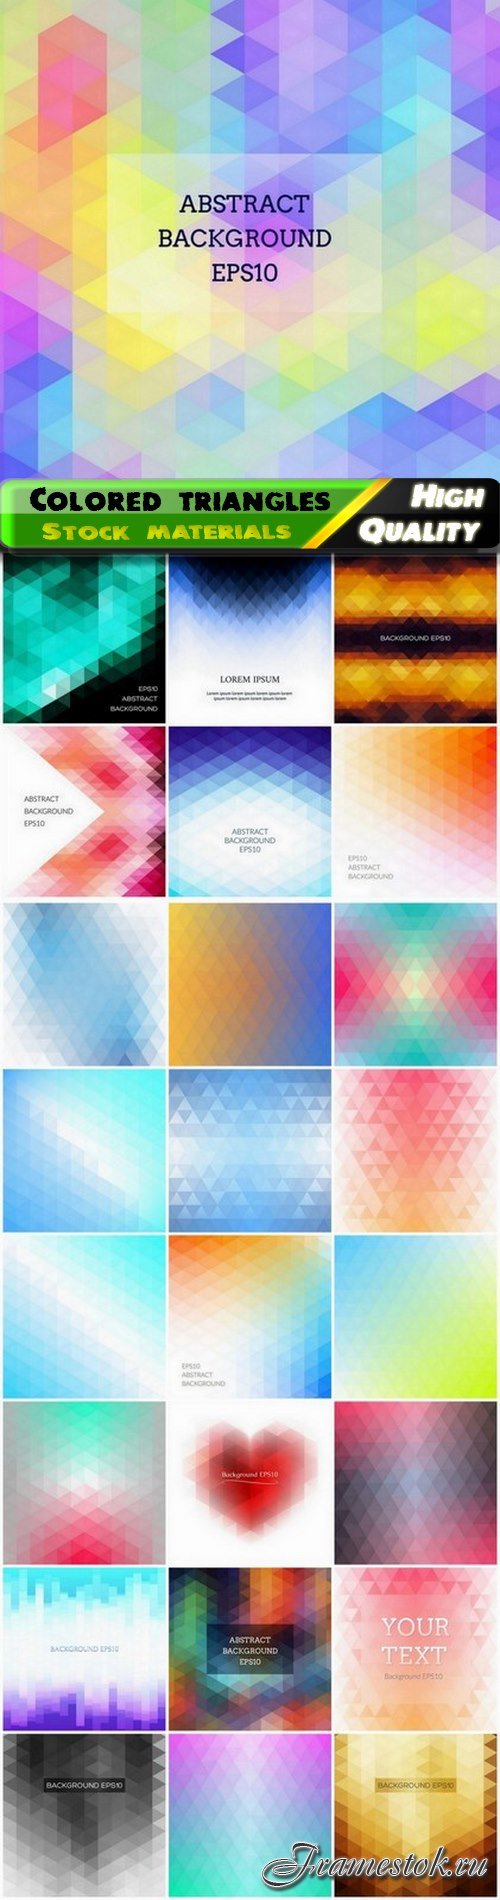 Abstract low poly background with colored triangles 25 Eps